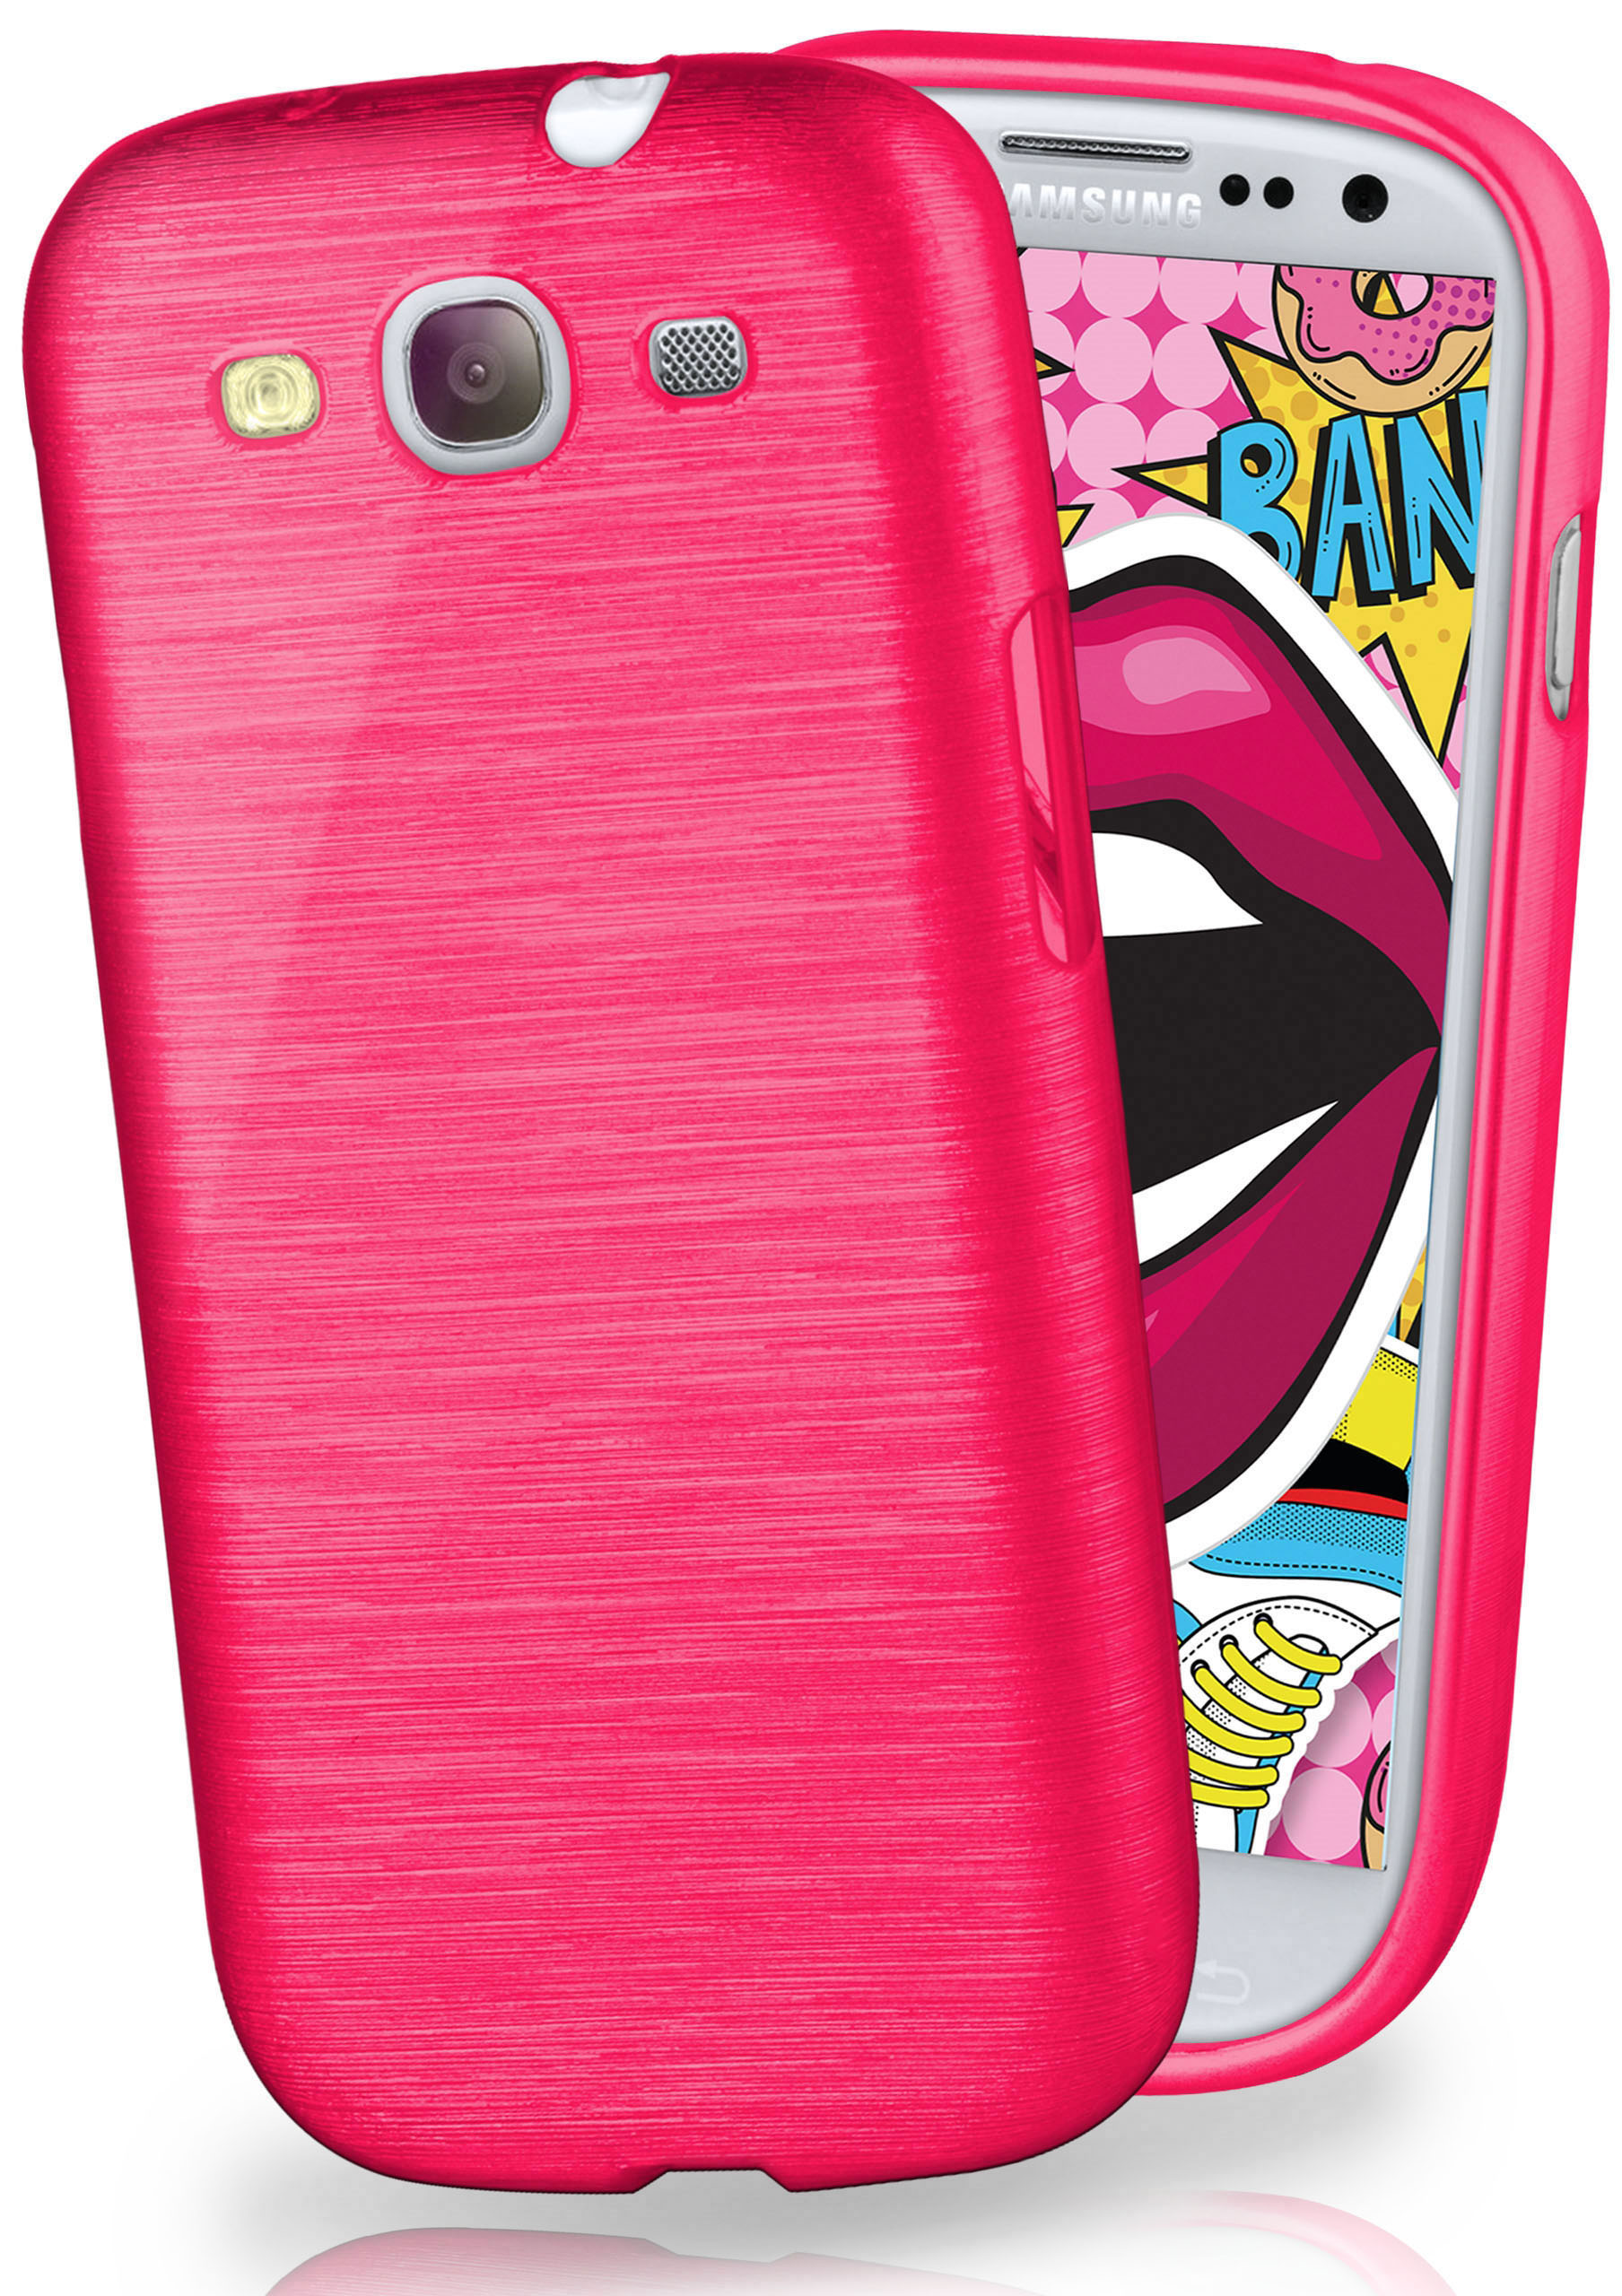 Samsung, Brushed S3 Backcover, Magenta-Pink / MOEX Neo, S3 Galaxy Case,